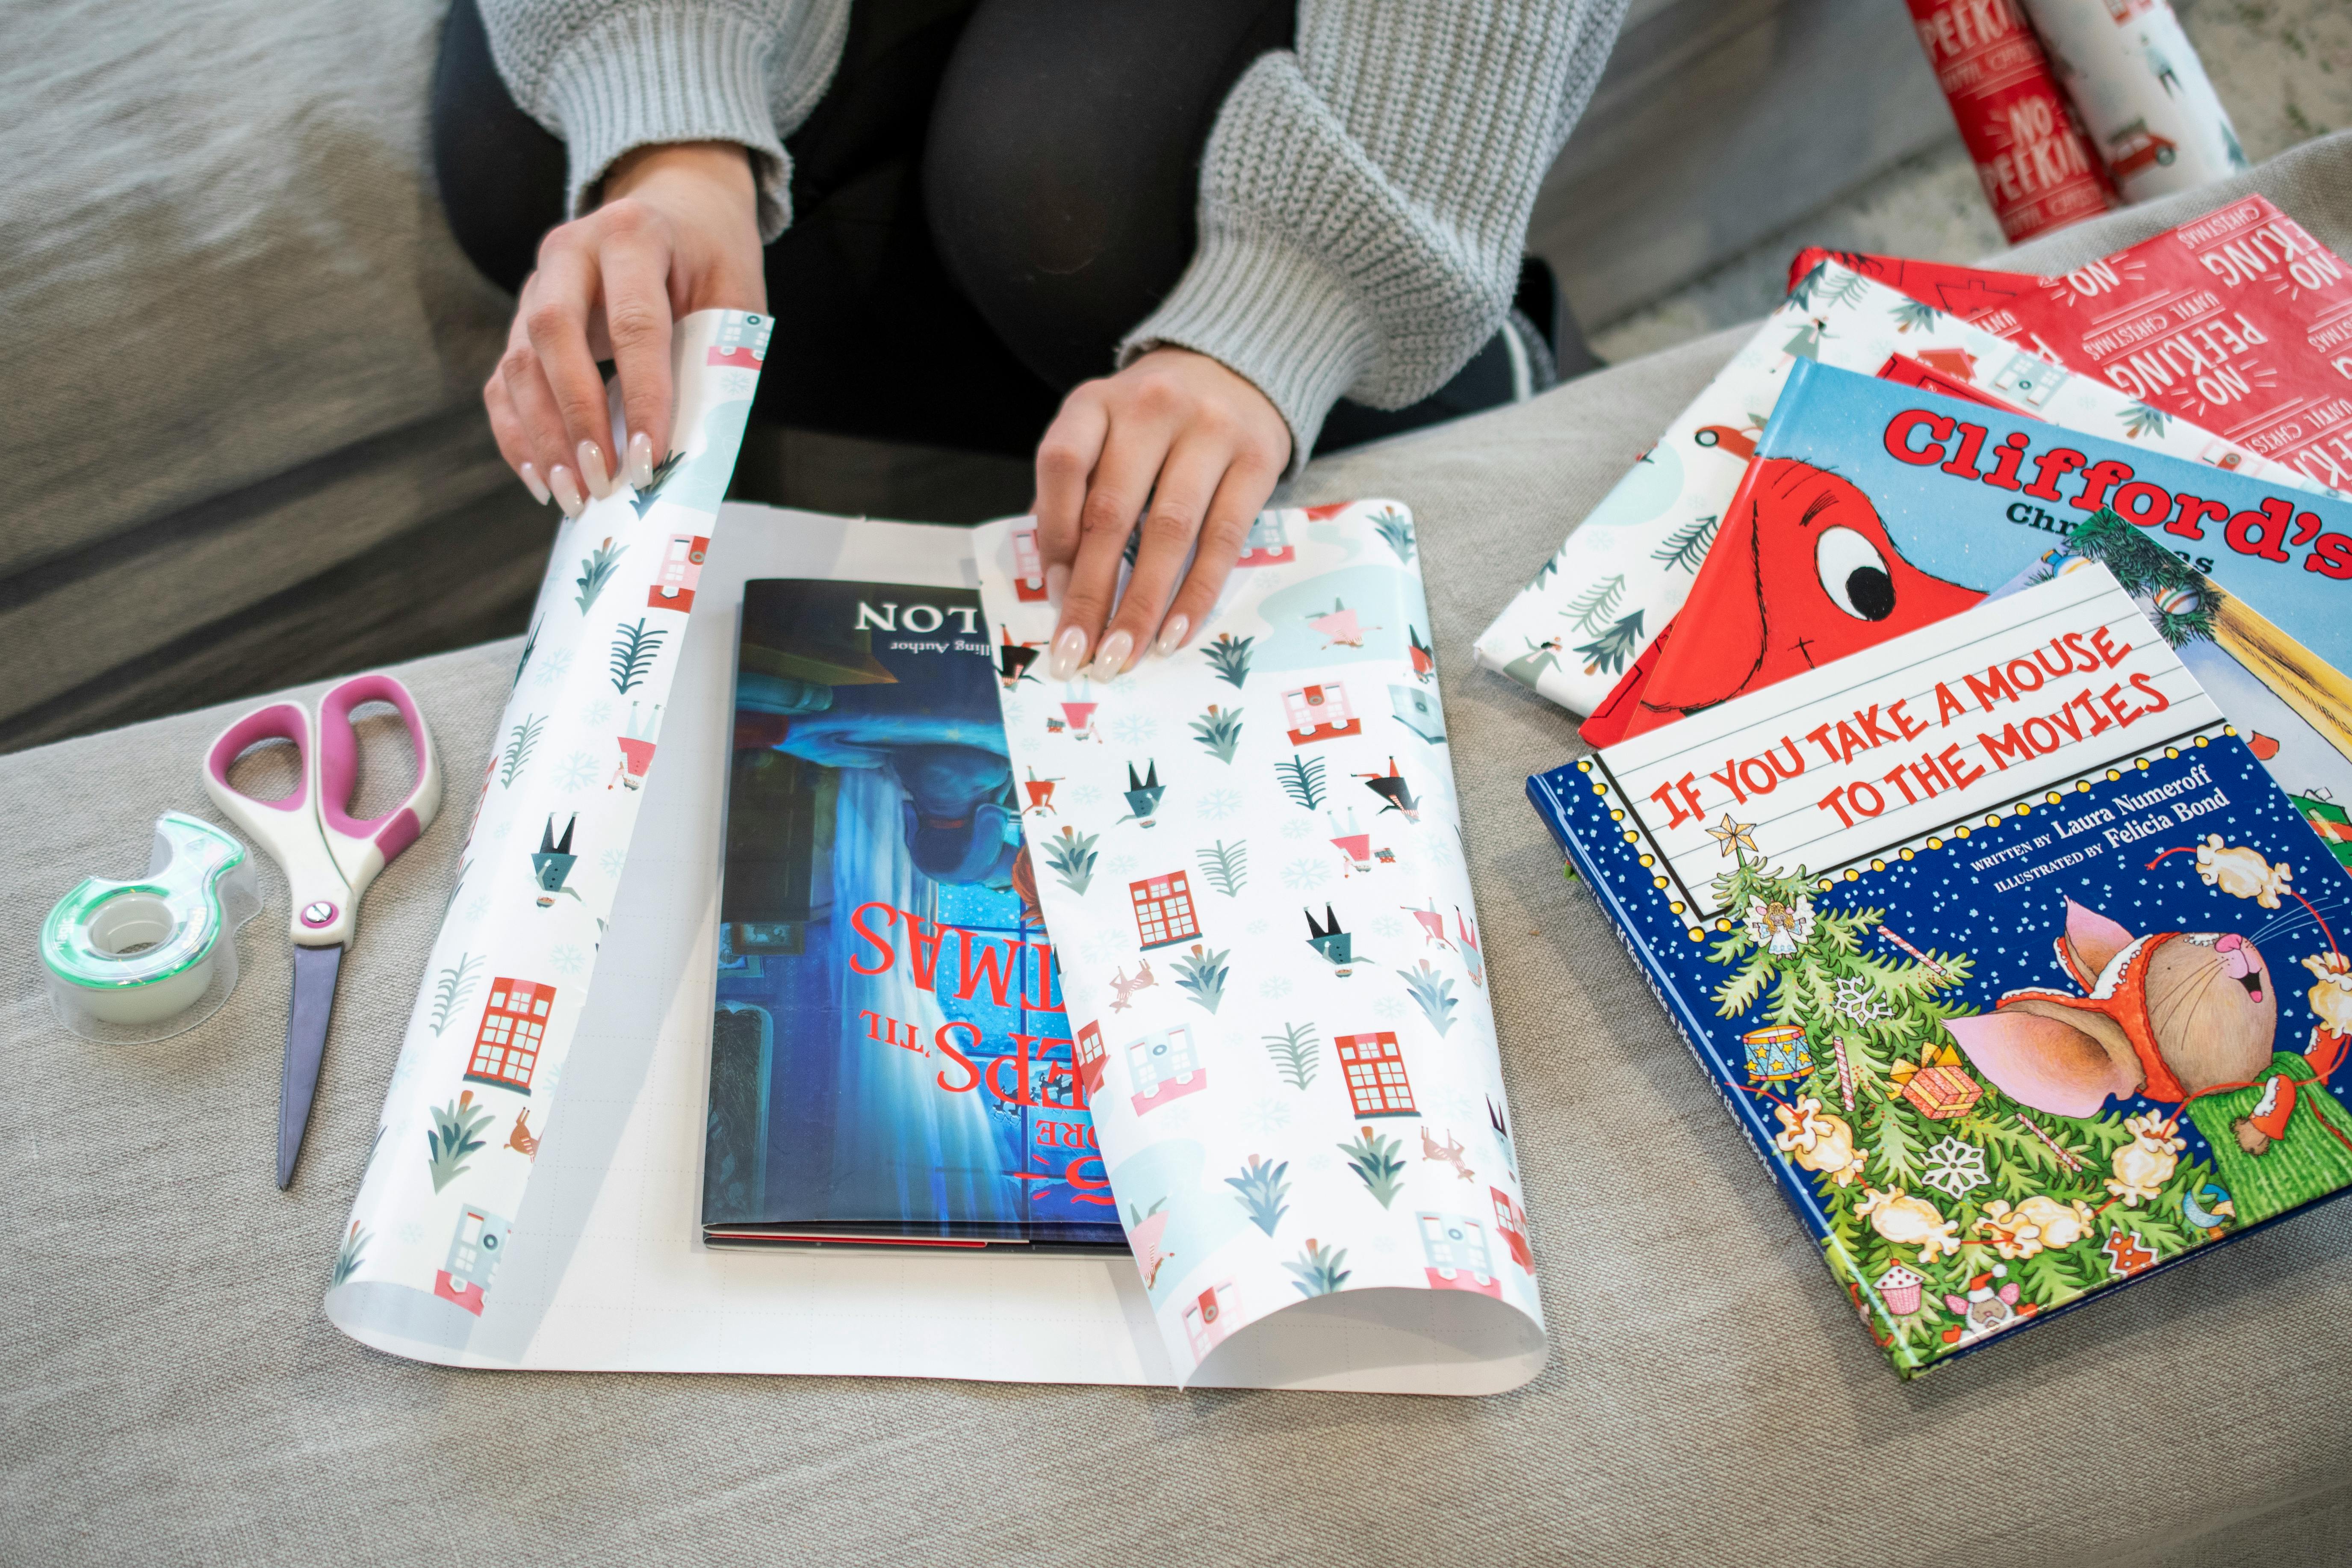 A person wrapping some books with gift wrap